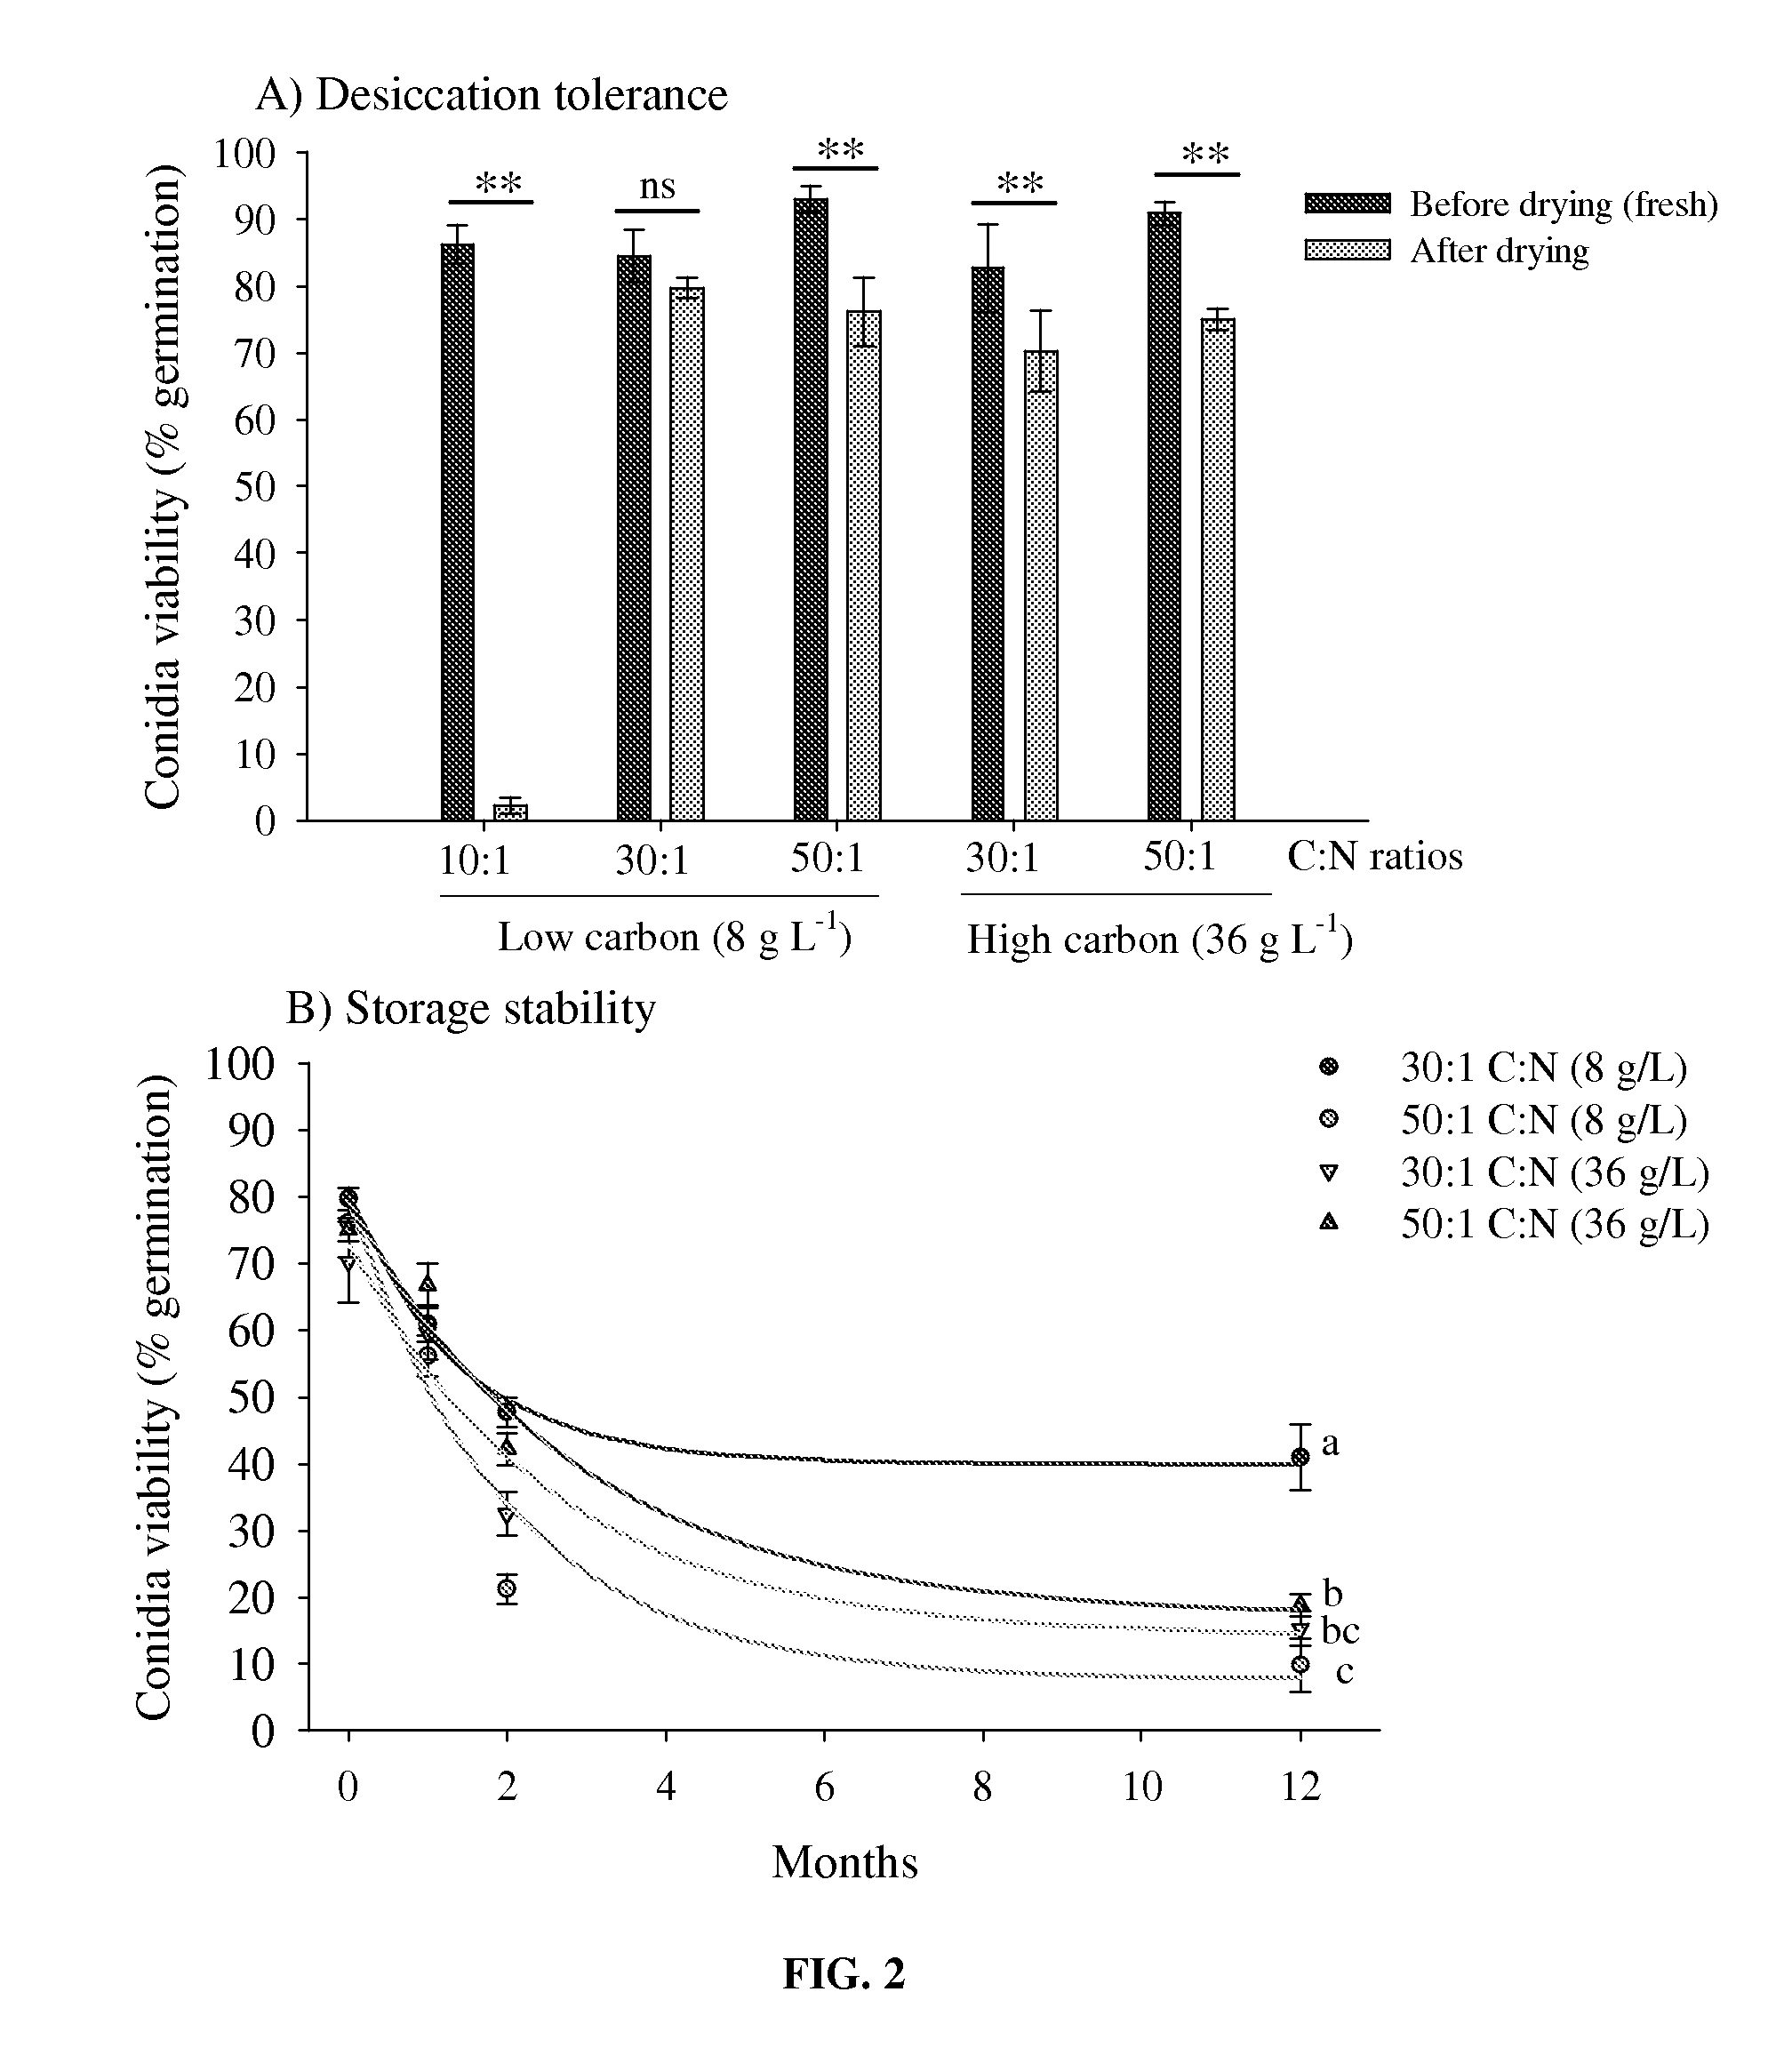 Trichoderma compositions and methods of use